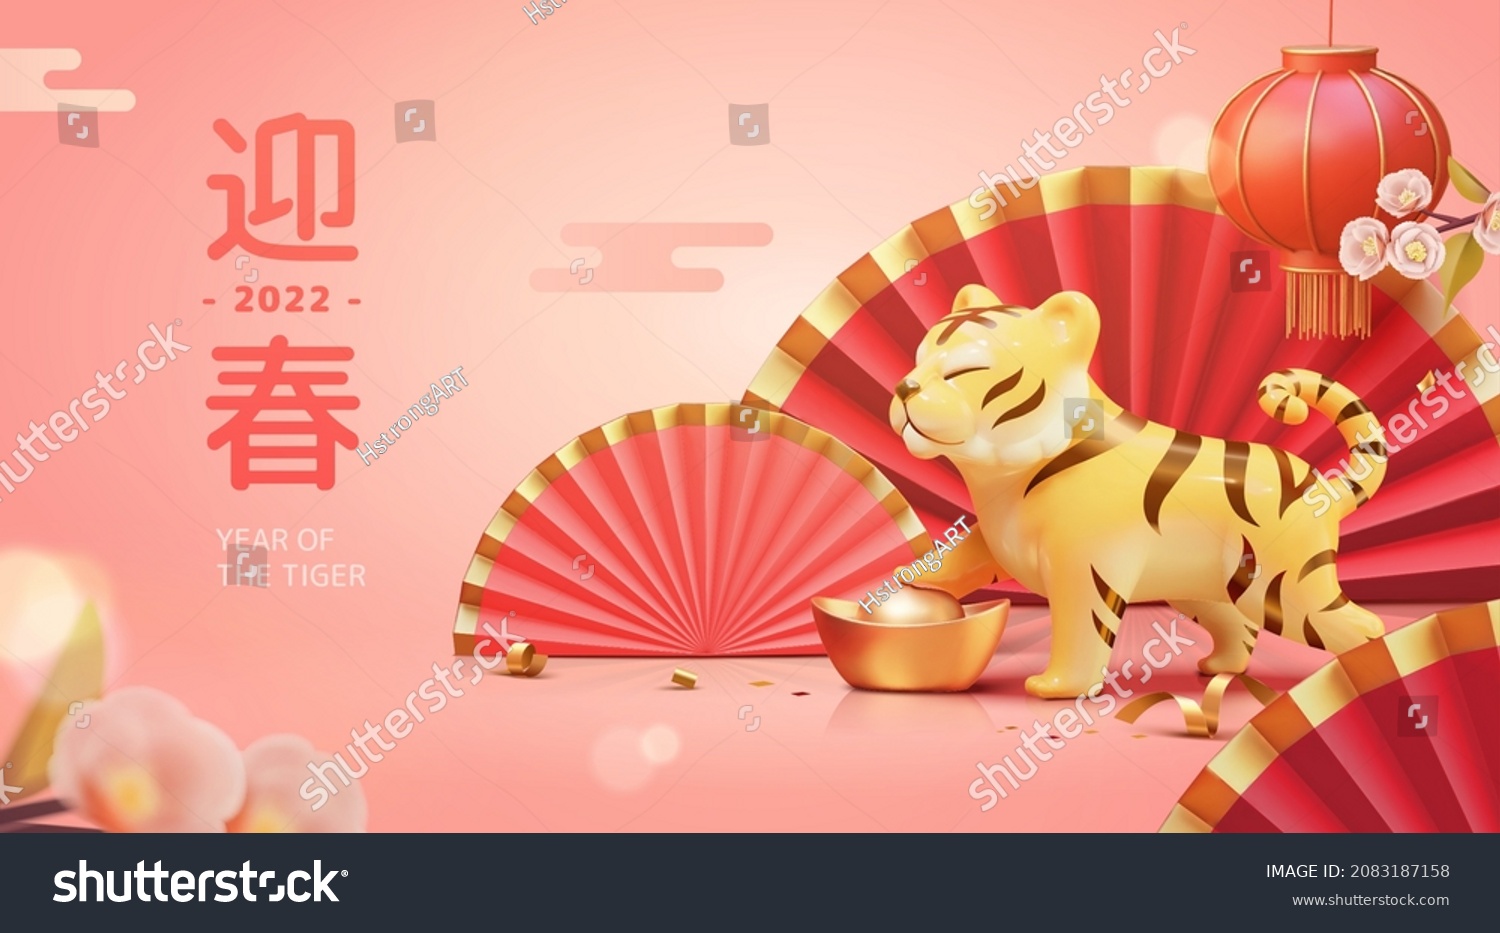 3d spring festival banner design with cute tiger toy and red paper fans. 2022 Chinese zodiac sign concept. Text: Welcome the spring season #2083187158